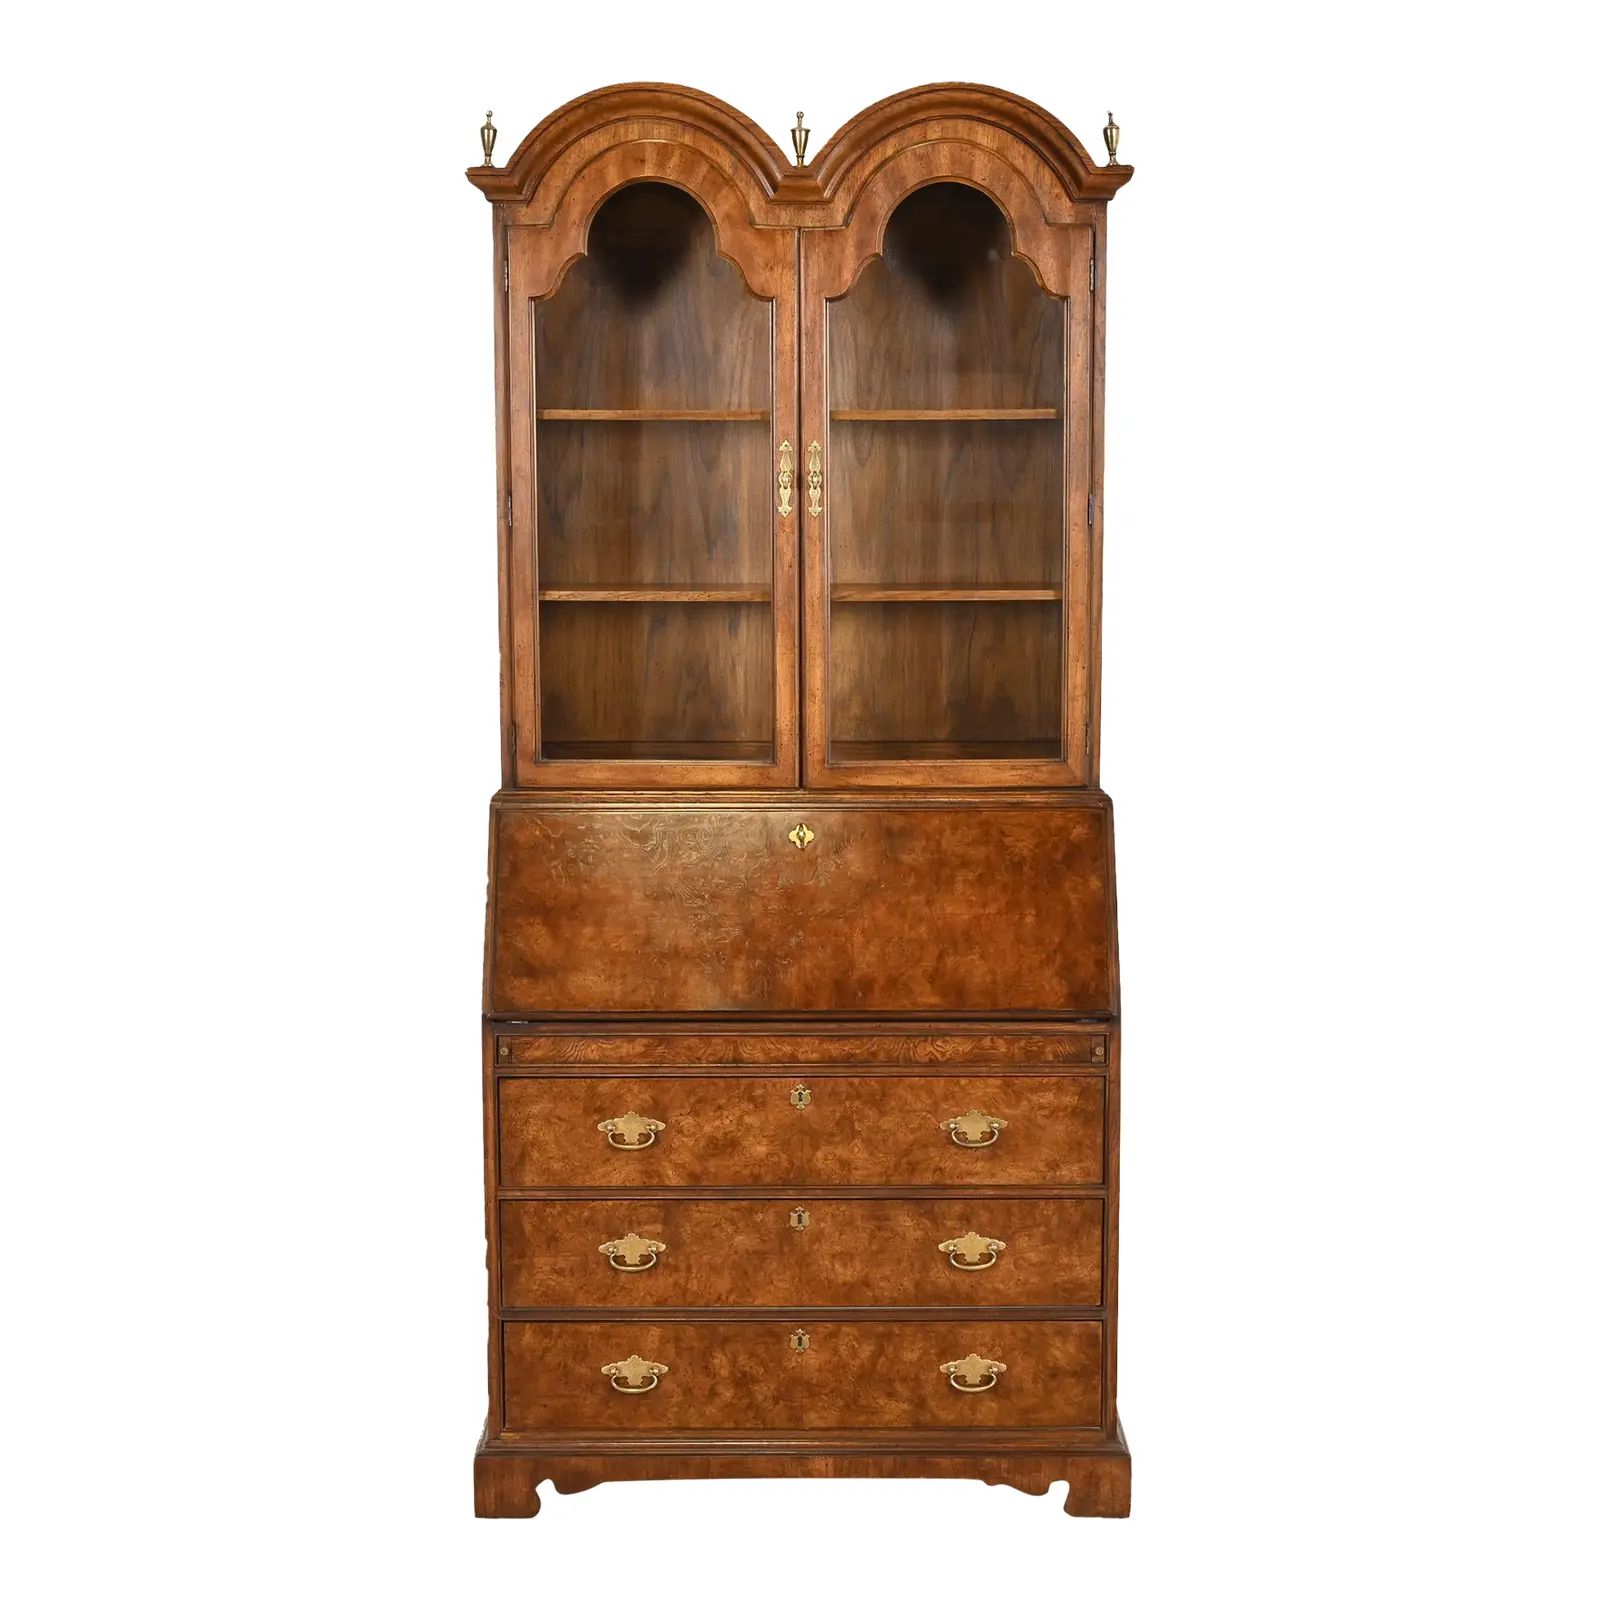 Georgian Burled Walnut Drop Front Secretary Desk With Bookcase Hutch by National Mt. Airy | Chairish